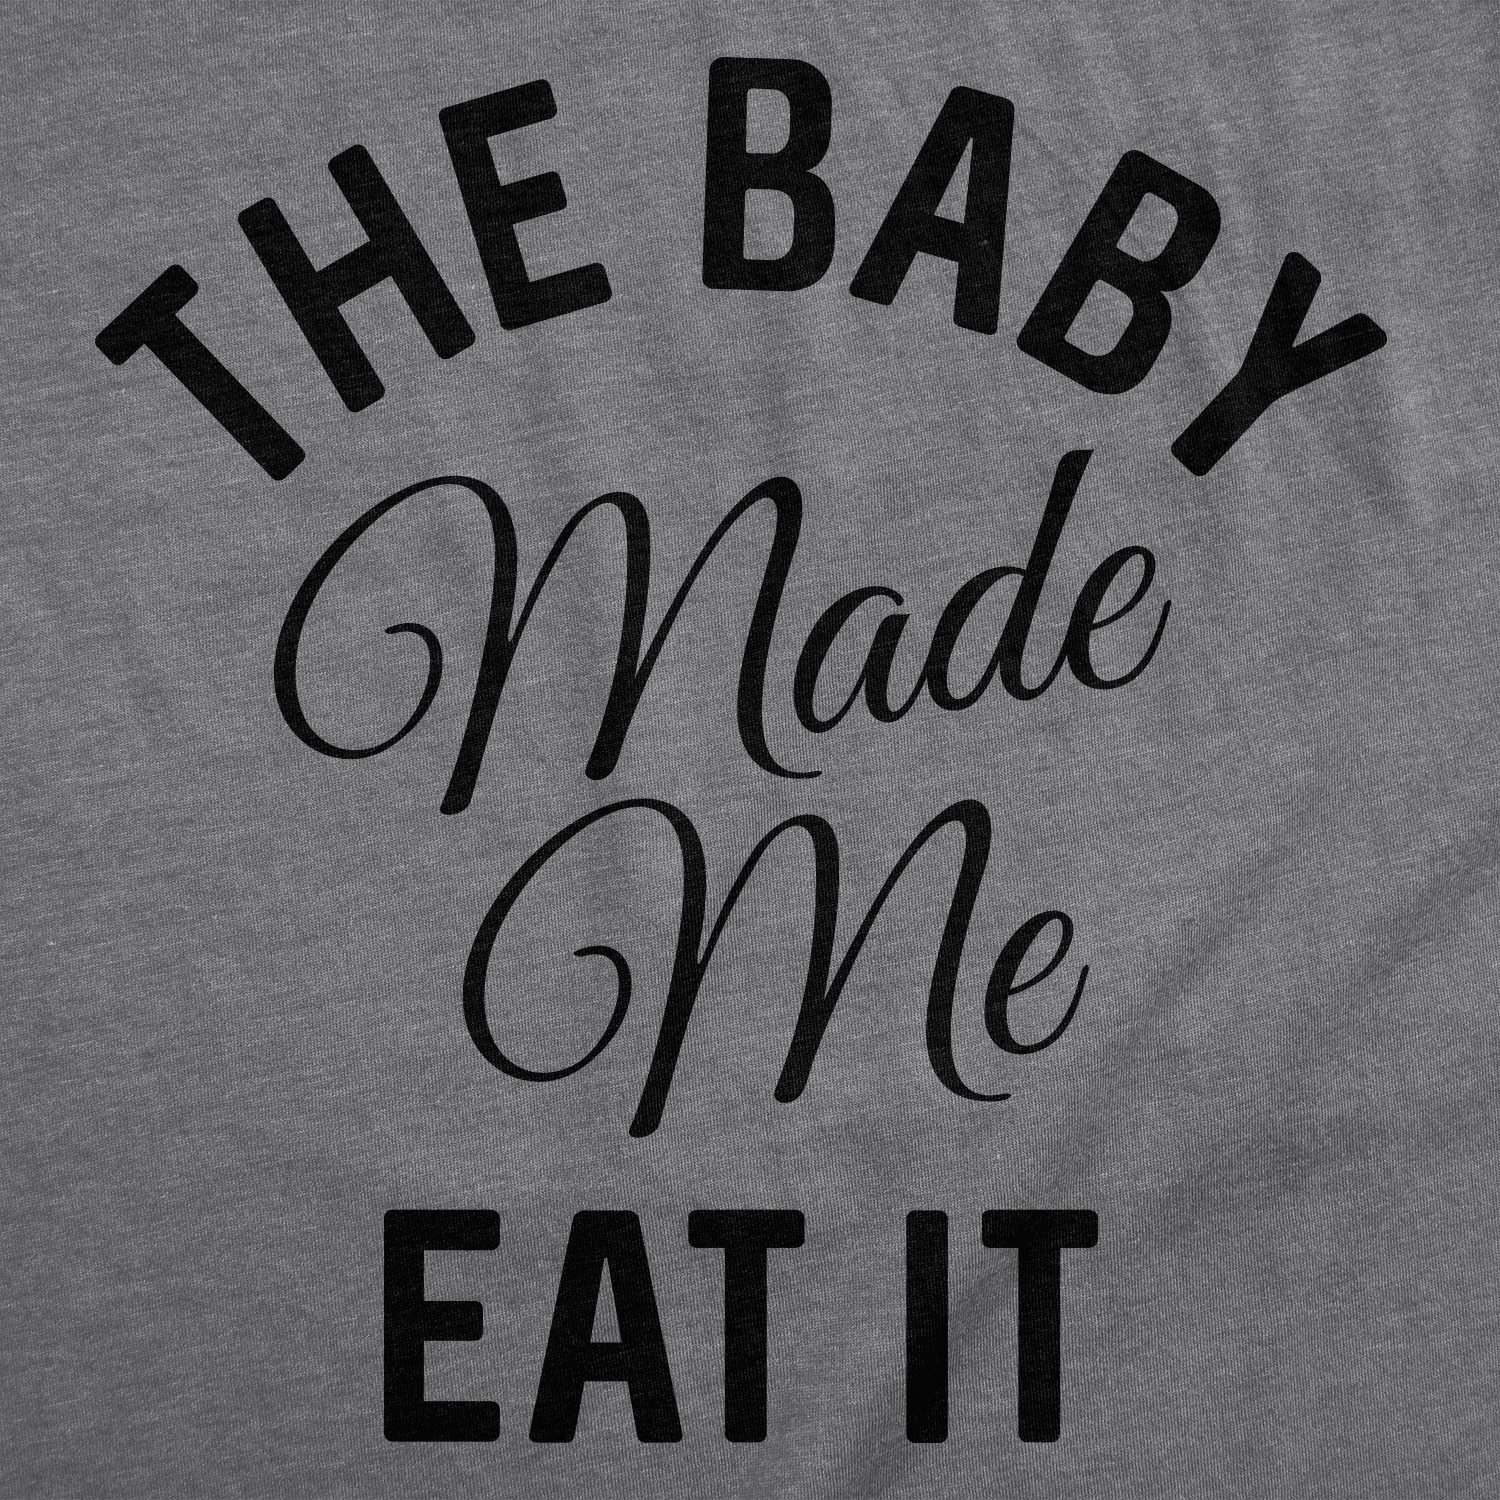 Funny Dark Heather Grey The Baby Made Me Eat It Maternity T Shirt Nerdy Food Tee